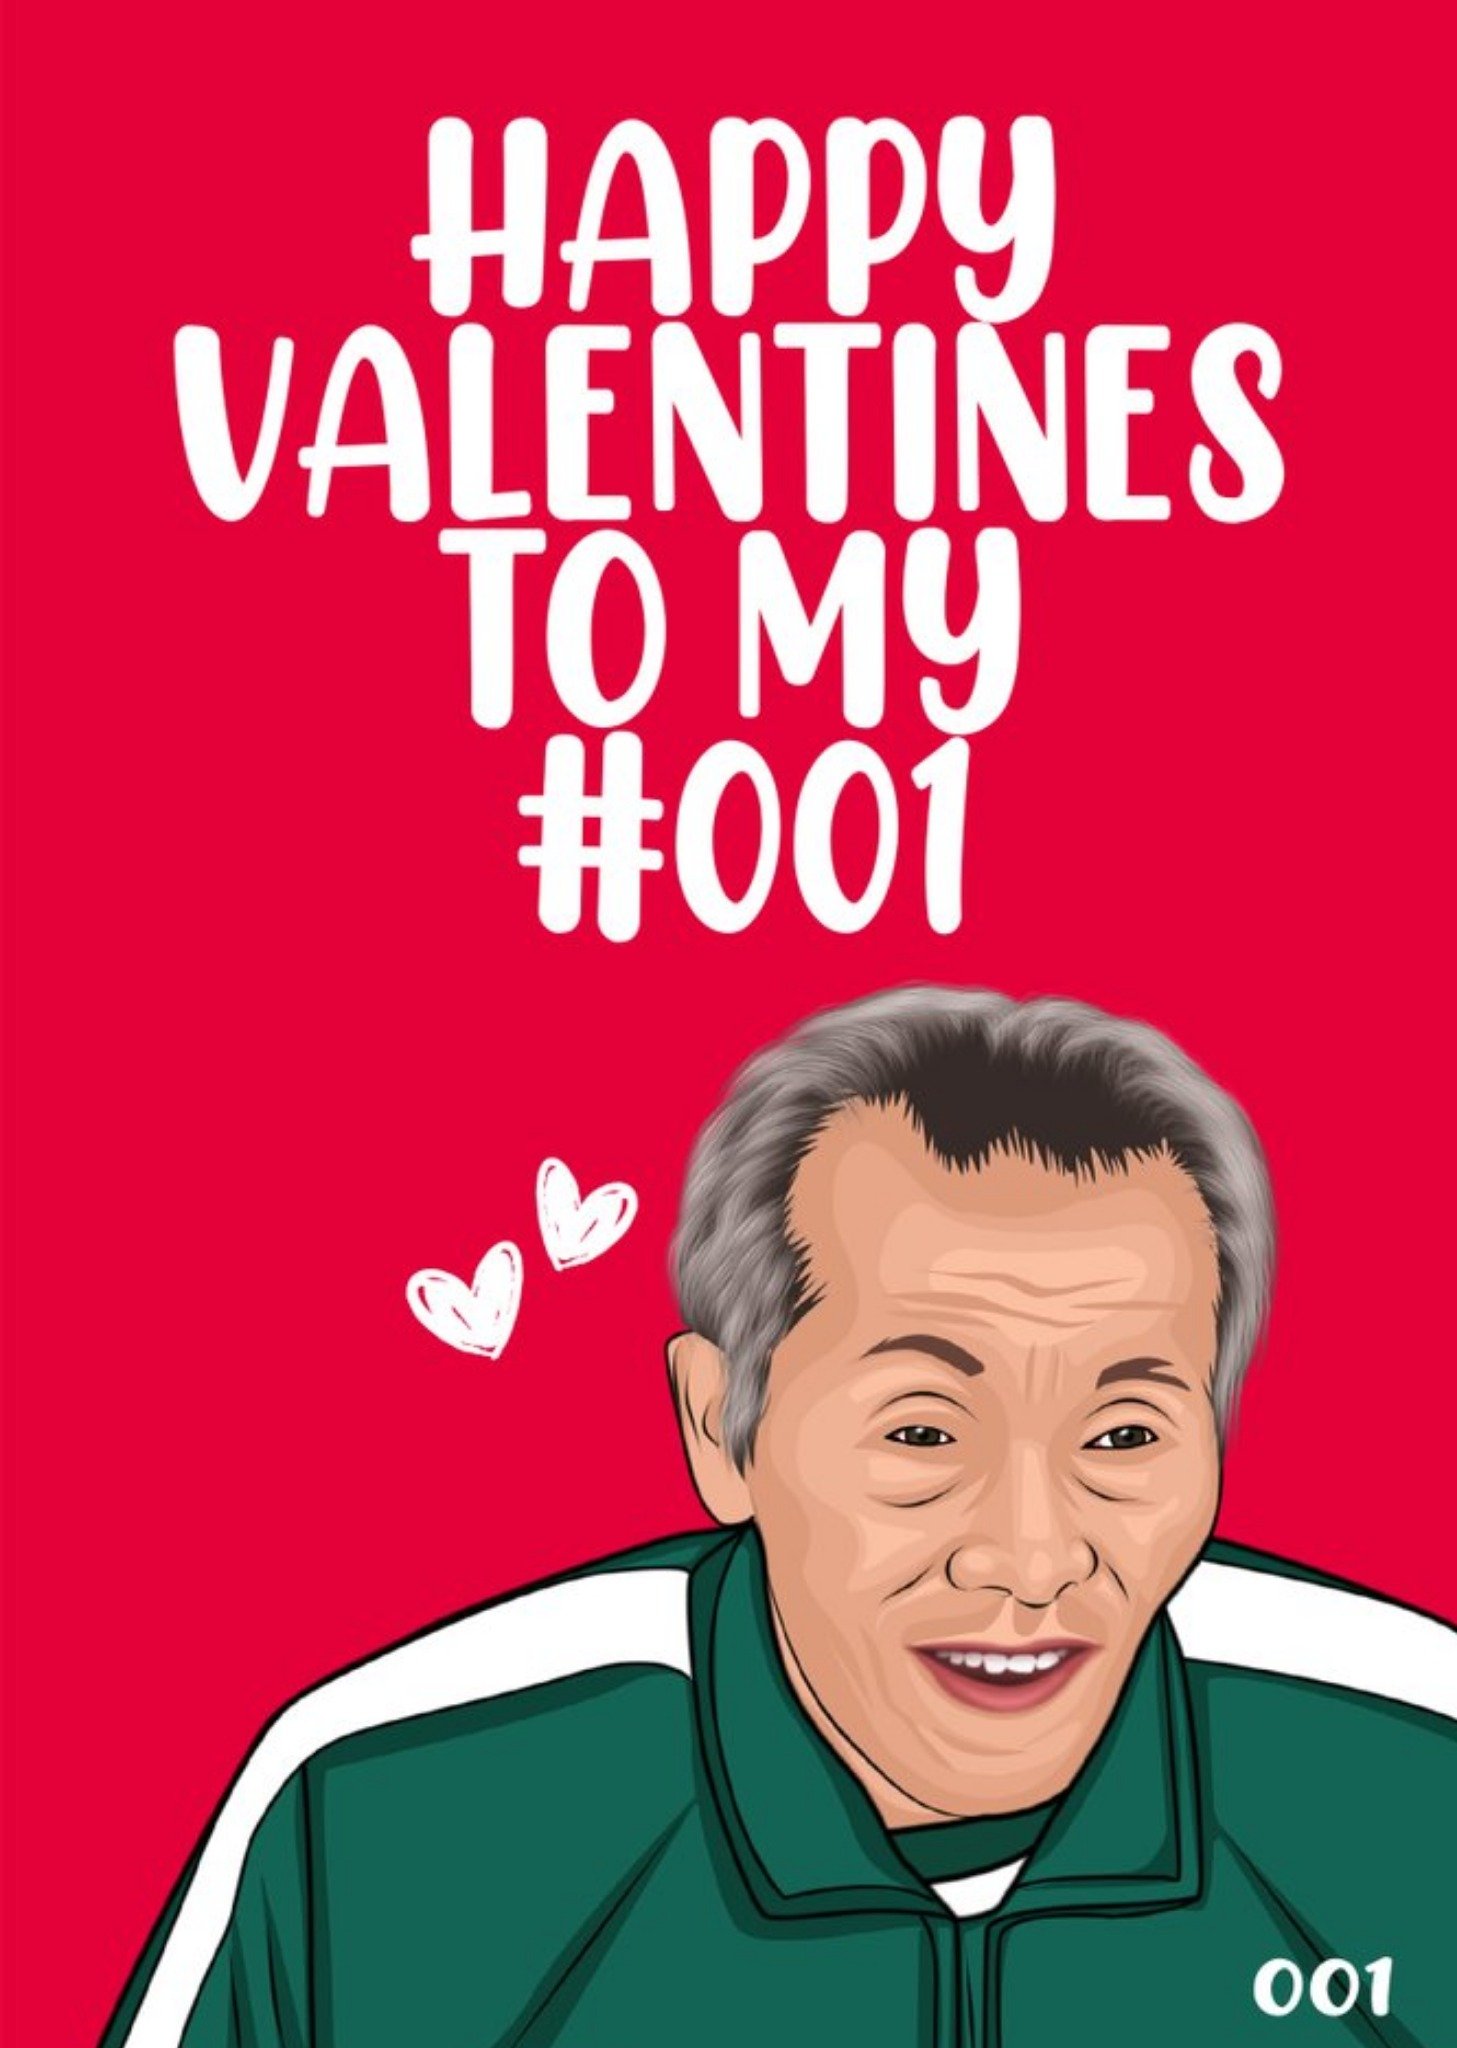 Filthy Sentiments Illustration Of An Old Man From The Popular Korean Survival Drama Valentine's Day 